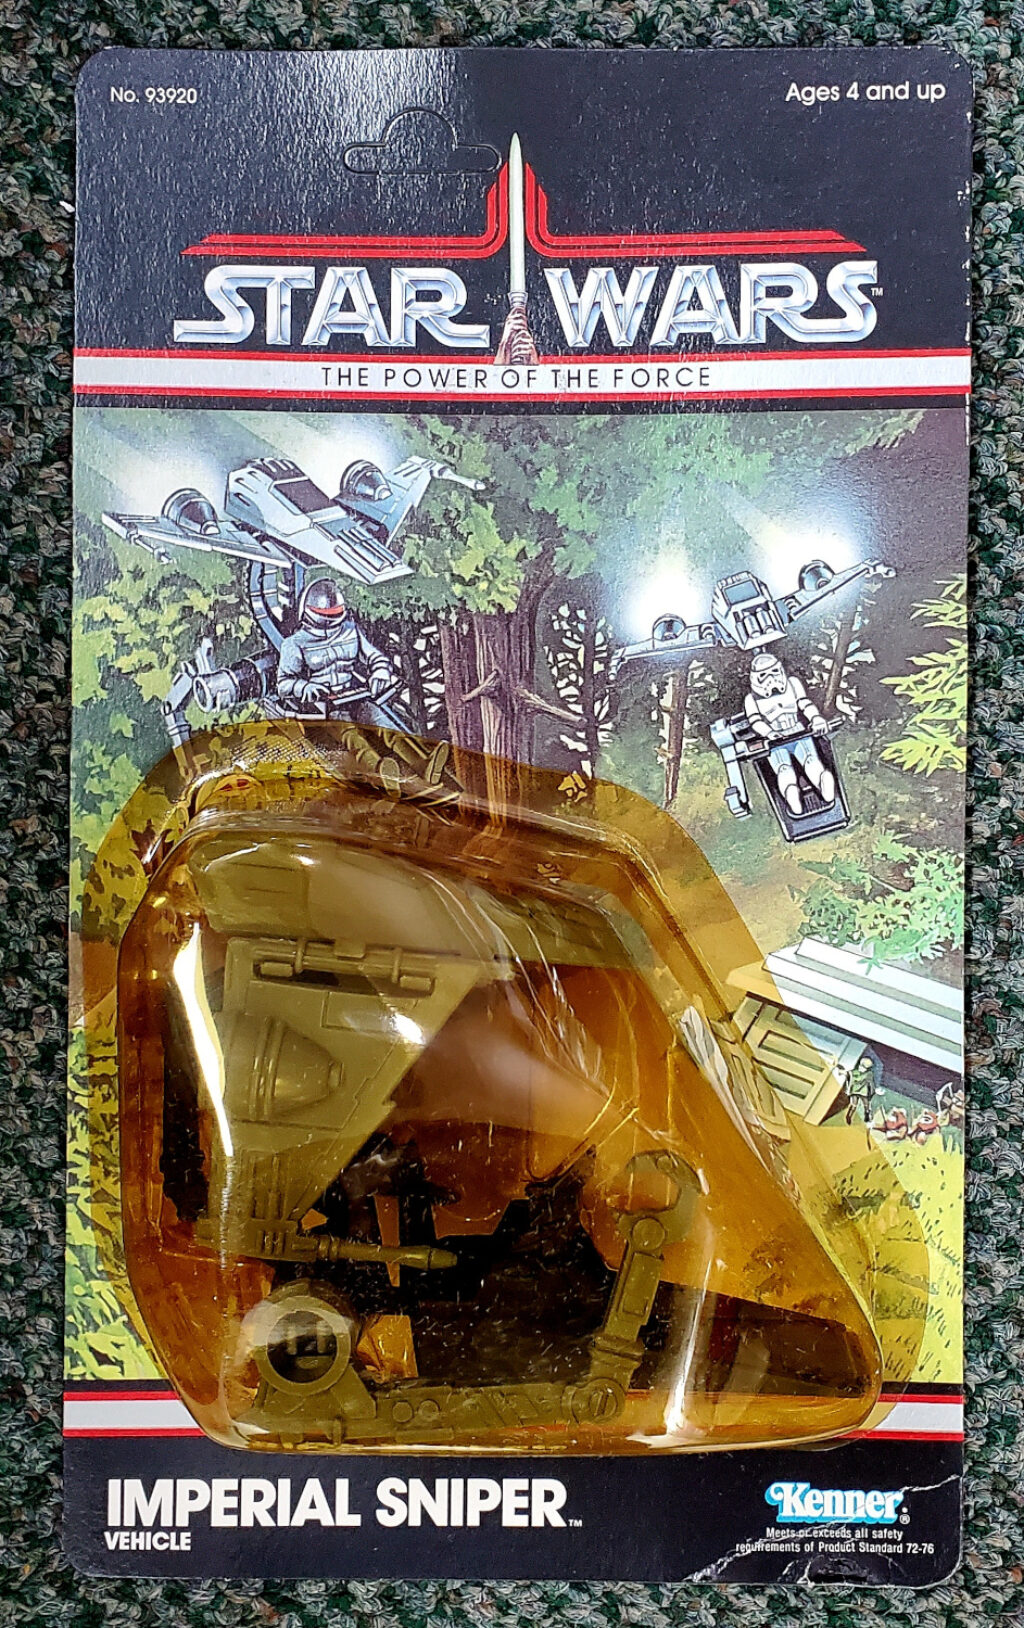 1984 MOC Kenner Star Wars Power of the Force Imperial Sniper Vehicle - Factory Sealed & Unpunched 1